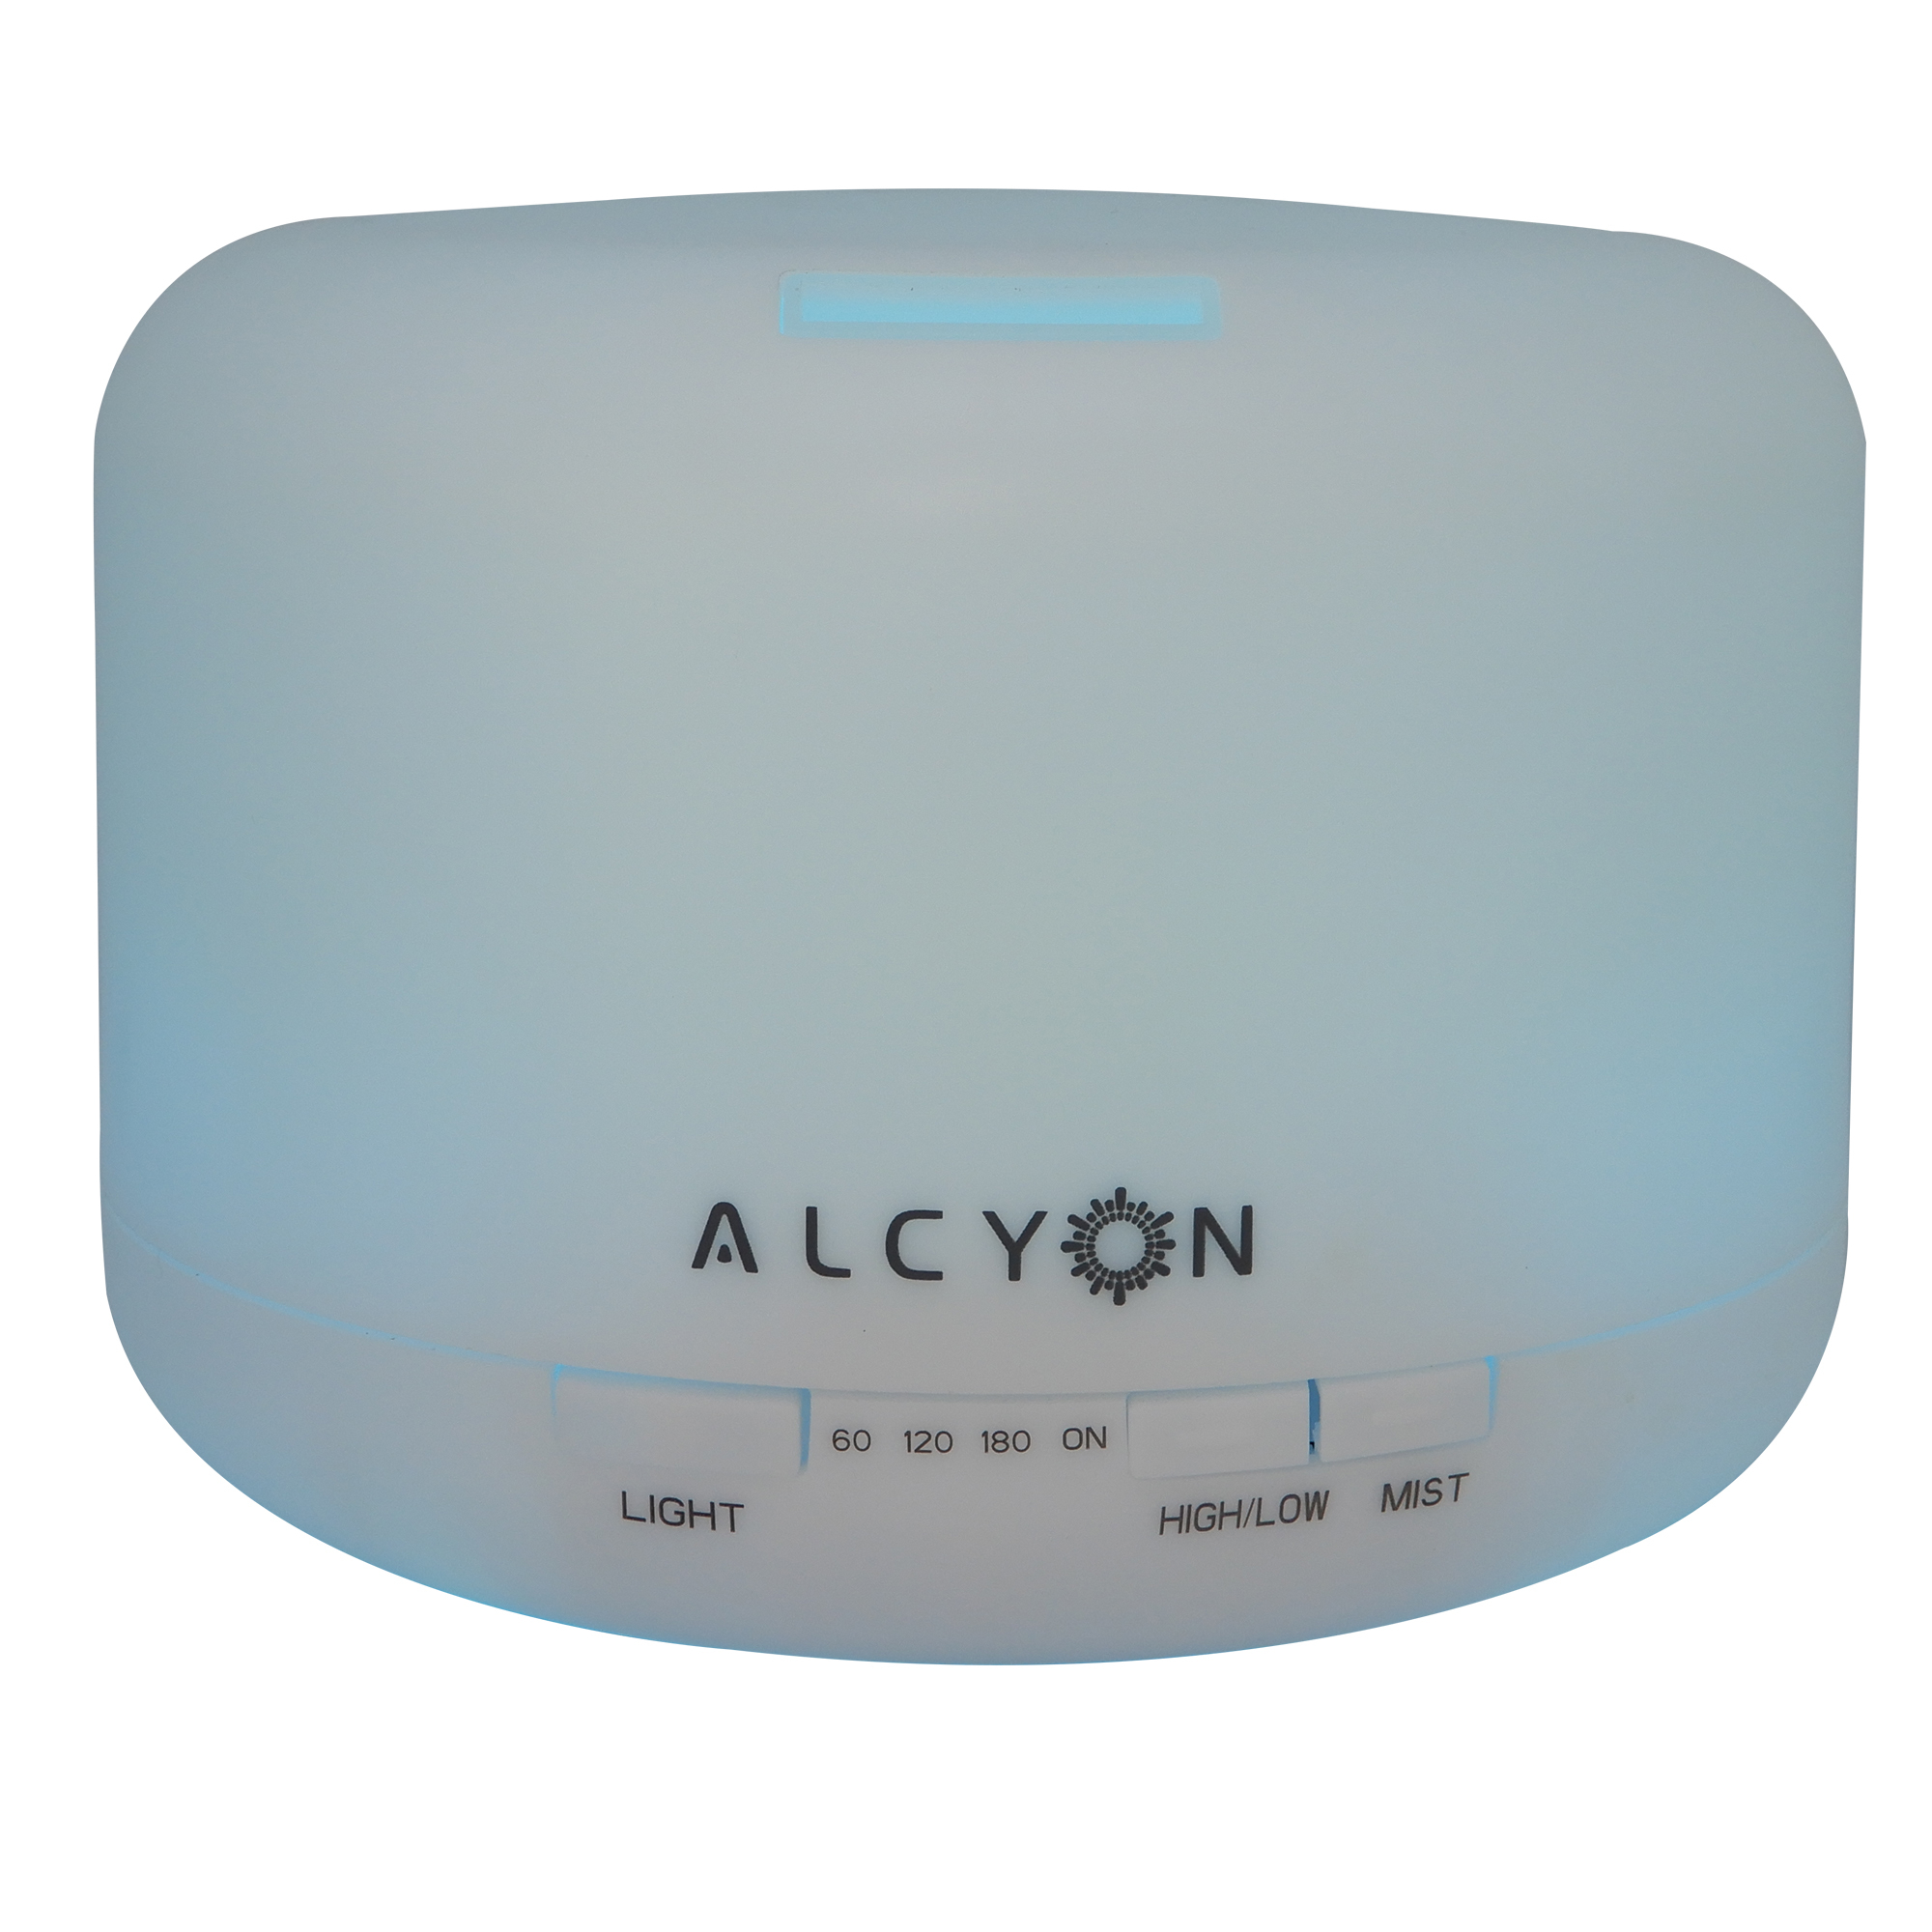 NEW Taiko Aroma Diffuser Alcyon,Candles & Diffusers eBay